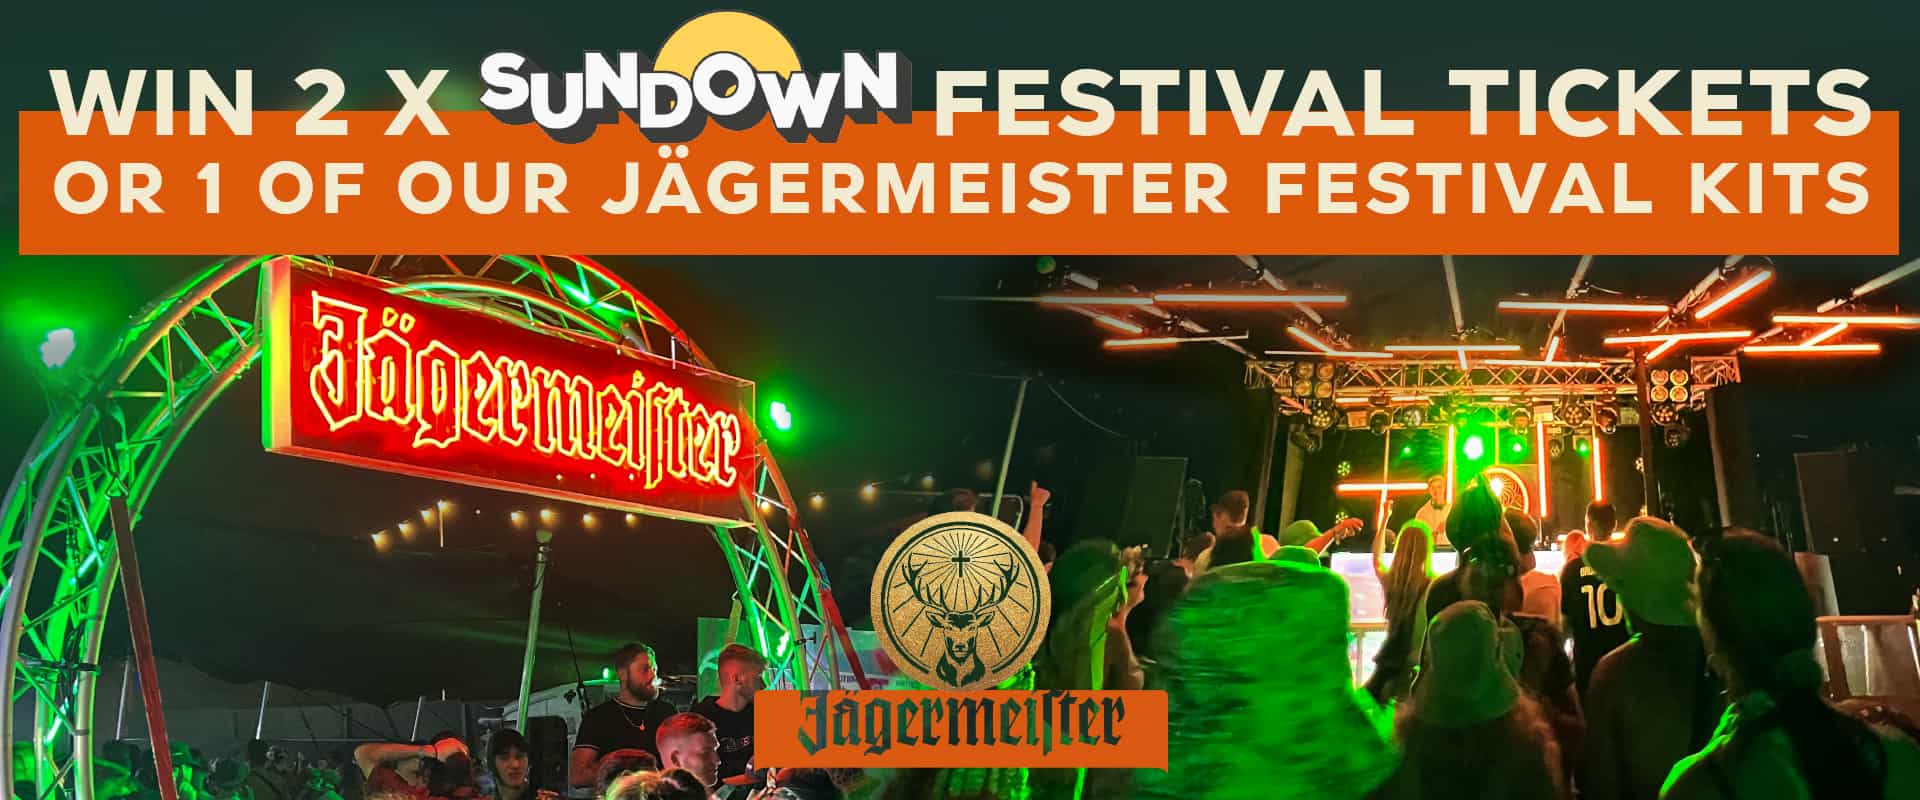 Win 2 tickets to Sundown Festival with Jagermeister and Fever Gloucester